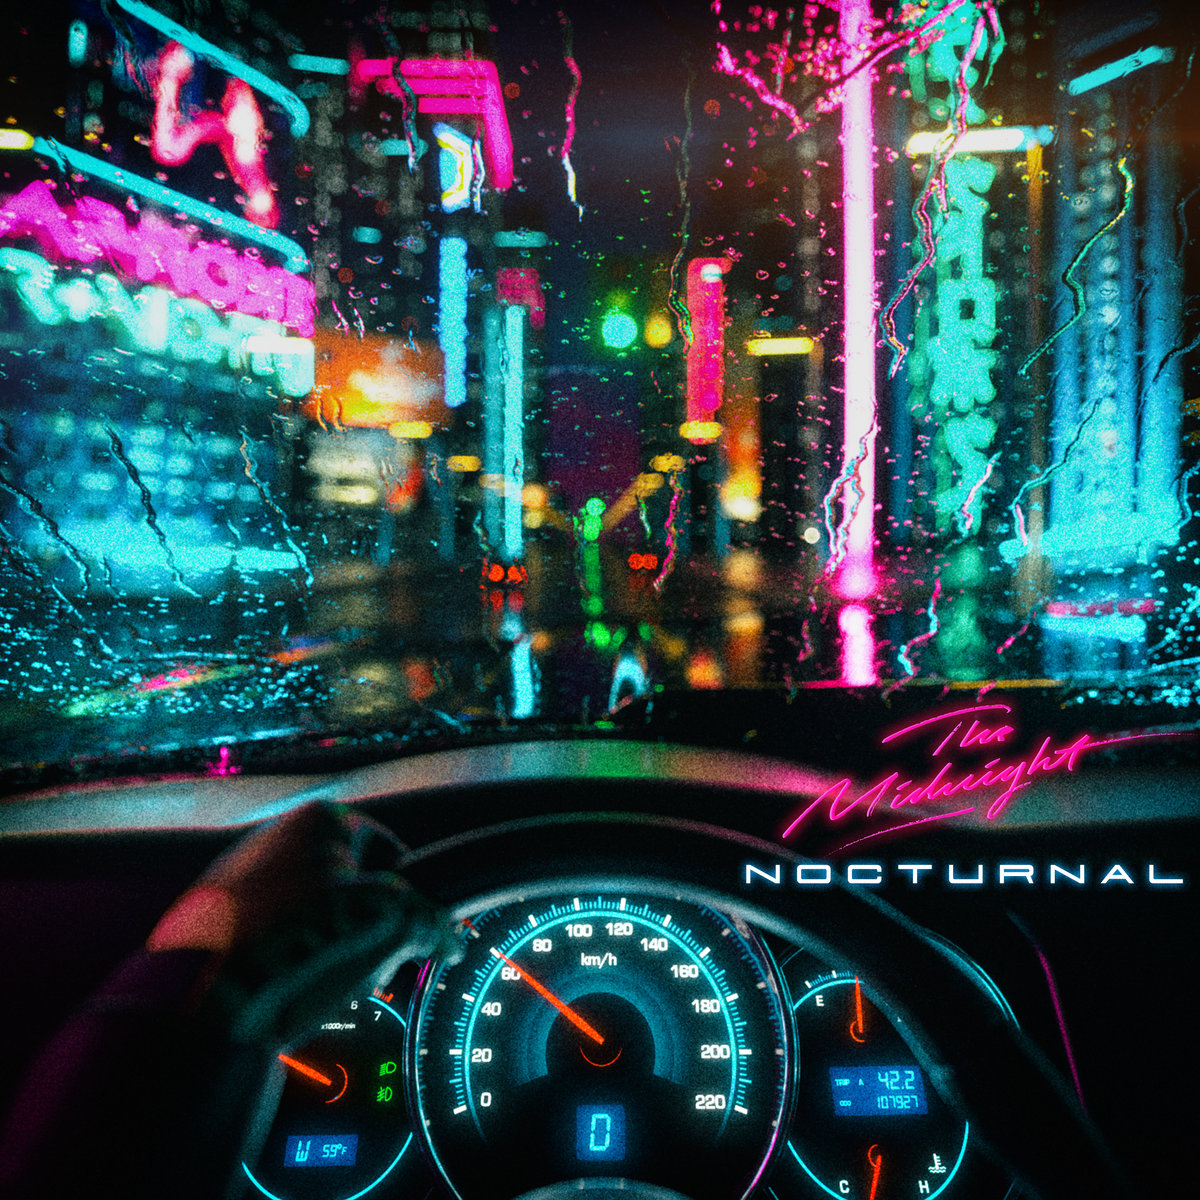 The Midnight Nocturnal cover artwork